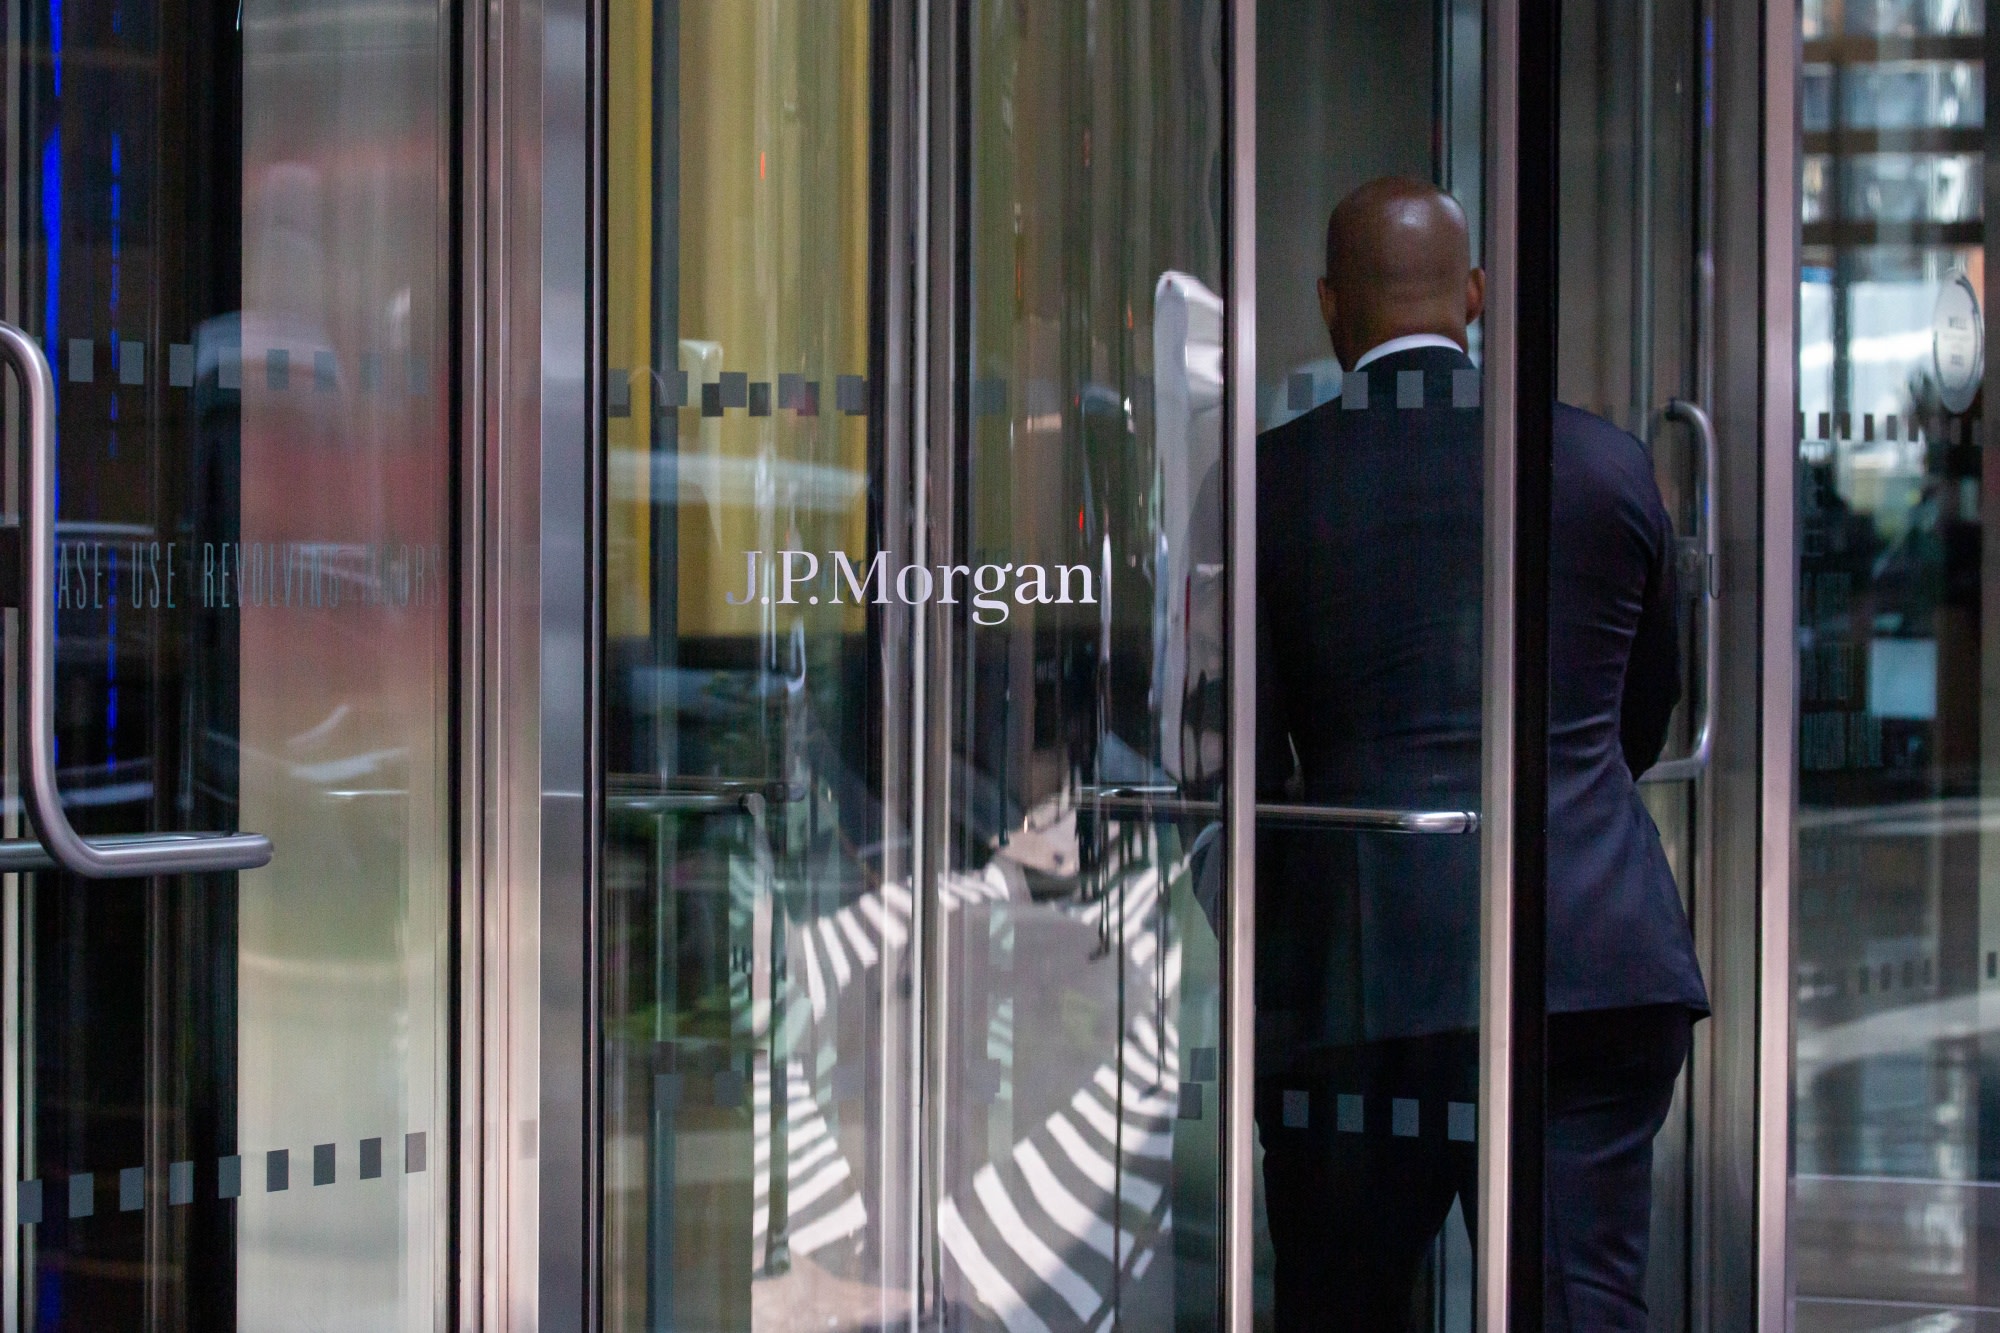 JPMorgan Chase Hires a Third-Party to Conduct a Racial Equity Audit